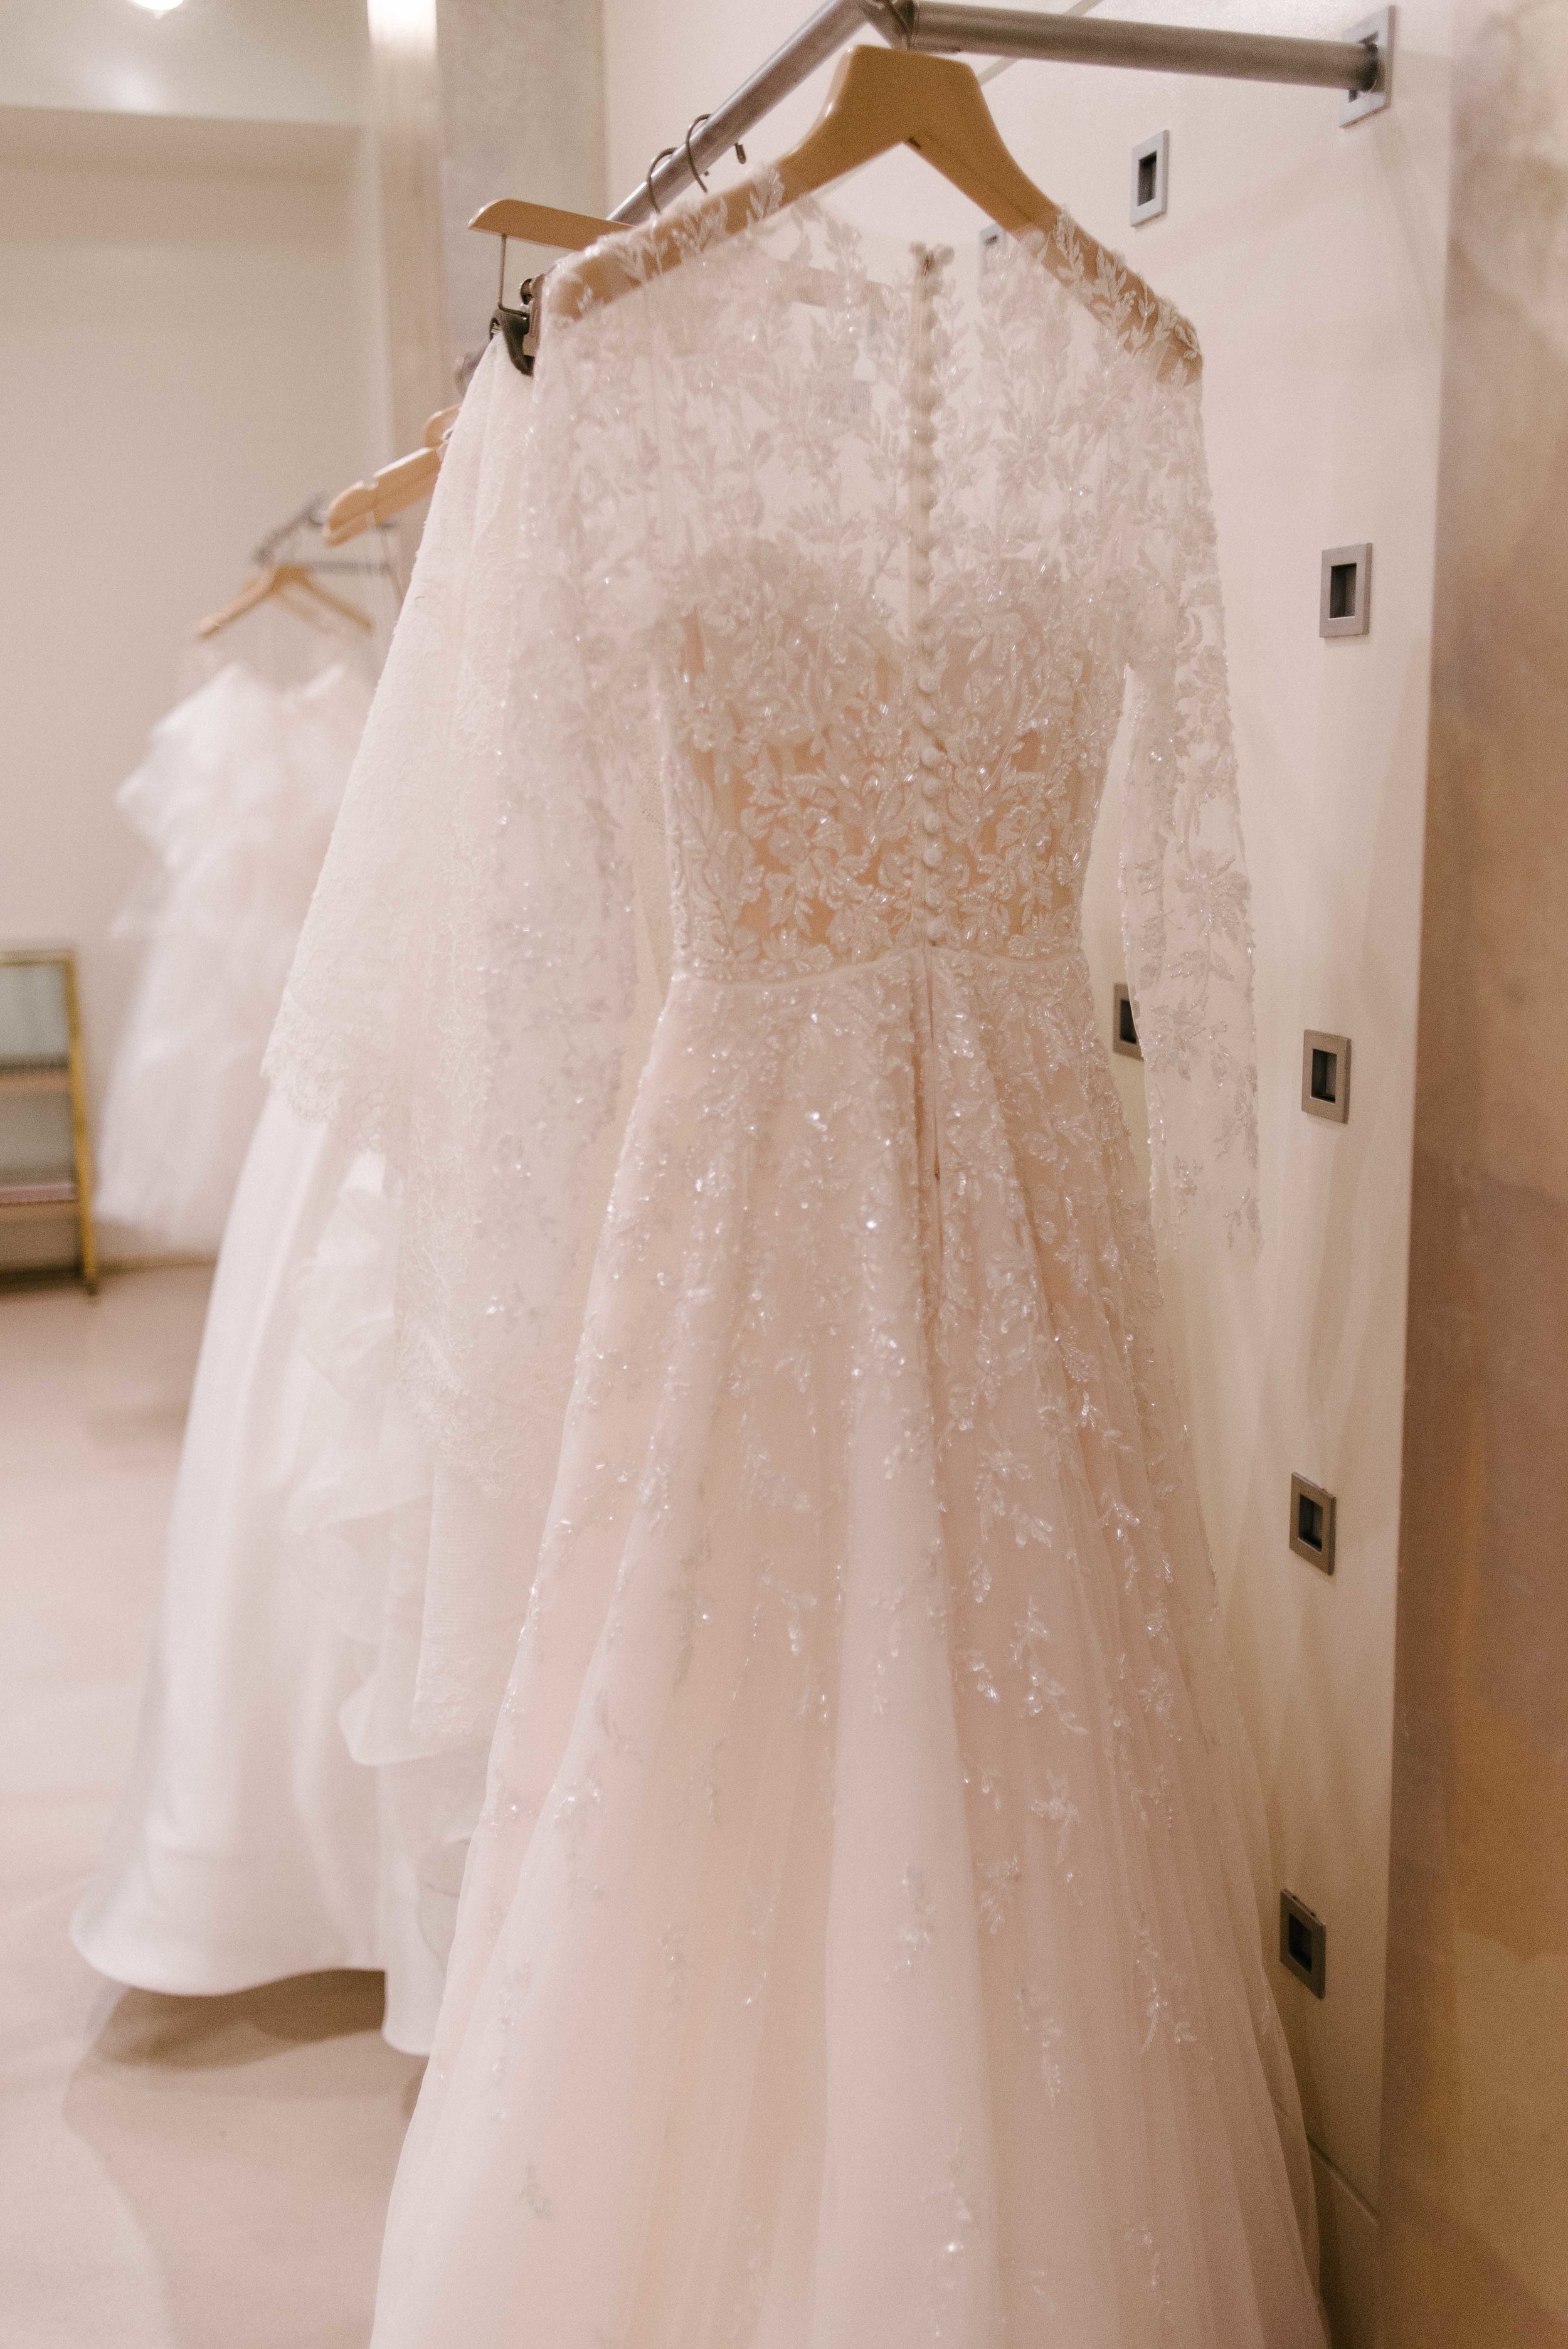  Reem Acra Fall 2016 Bridal Collection 